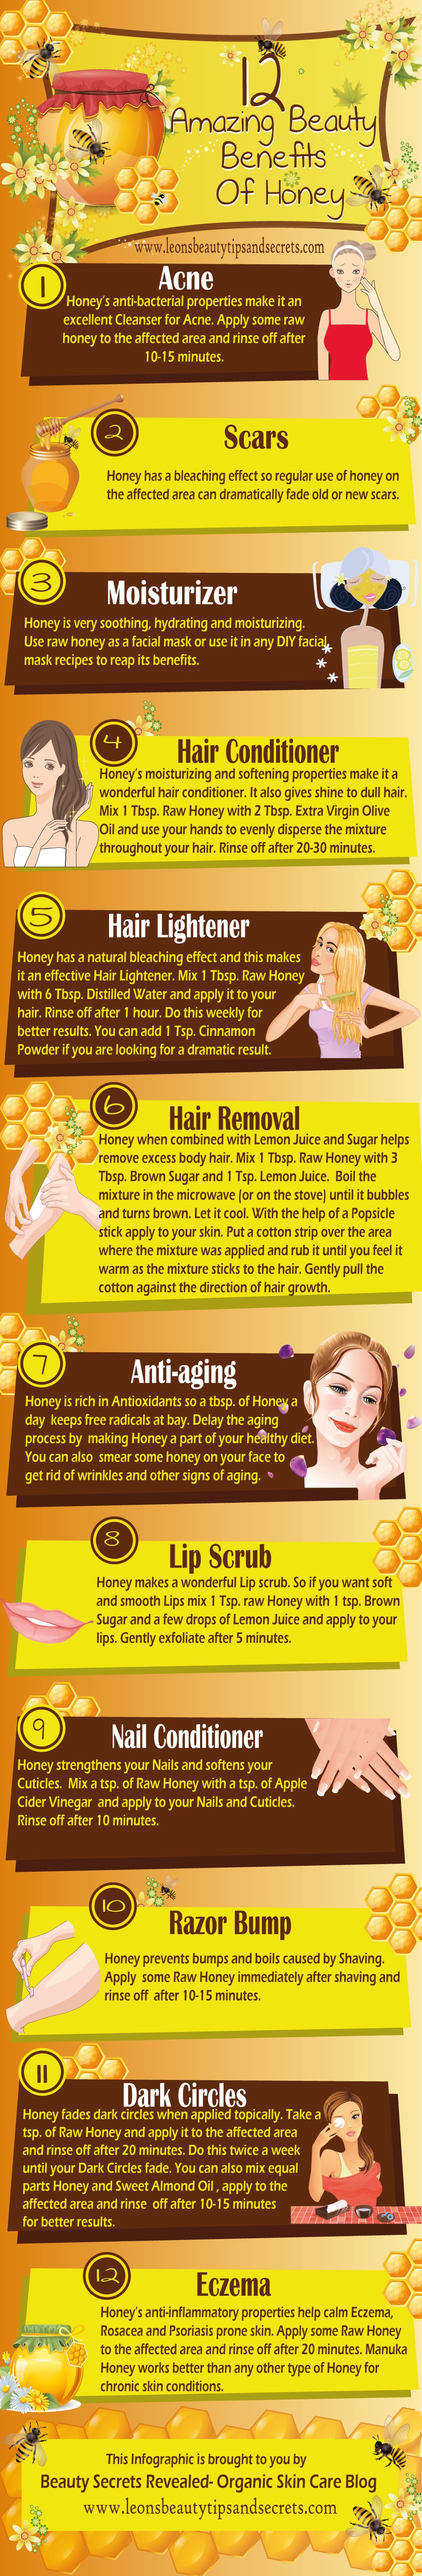 12 Amazing Benefits of Honey for Your Skin and Hair - HRF